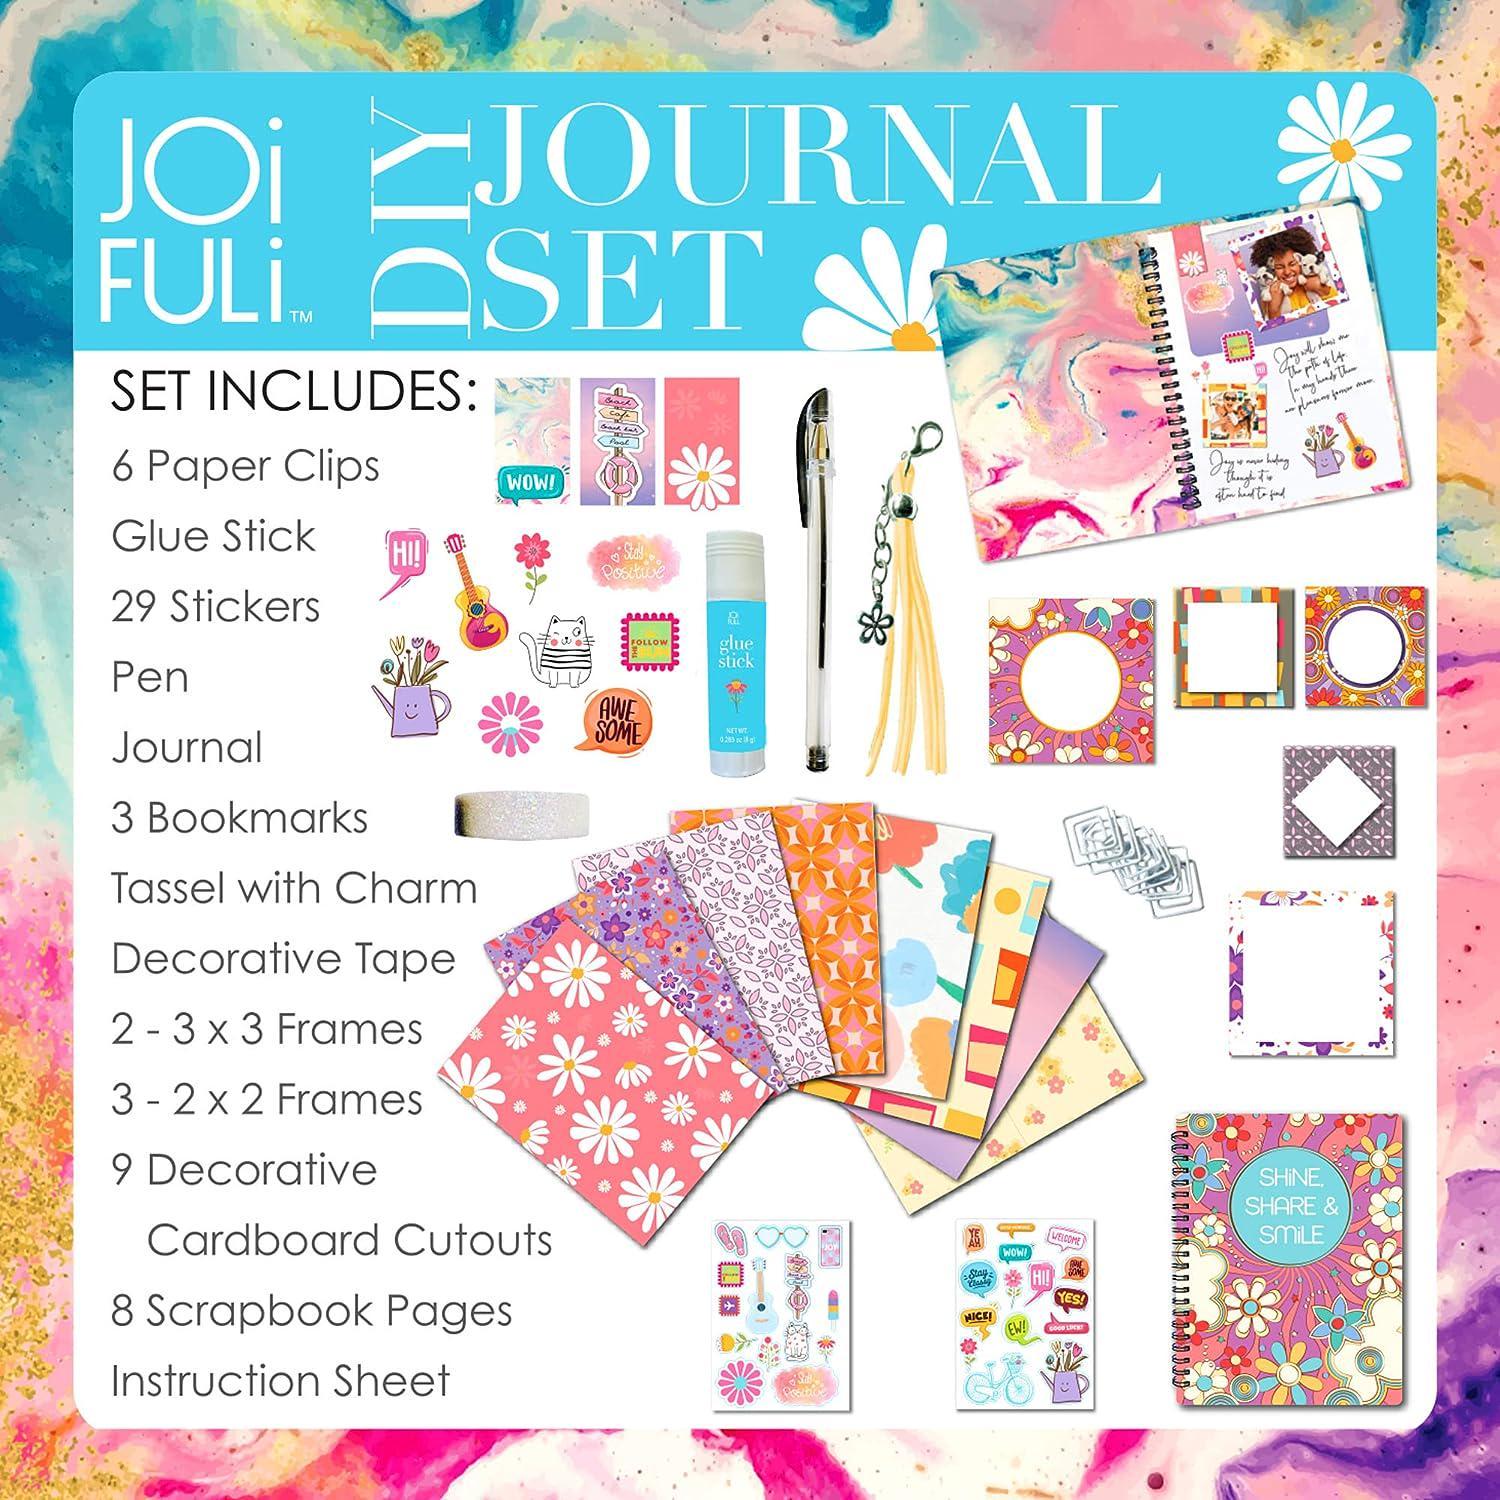 Hapinest DIY Journal Set for Girls Gifts Ages 8 9 10 11 12 13 Years Old and Up